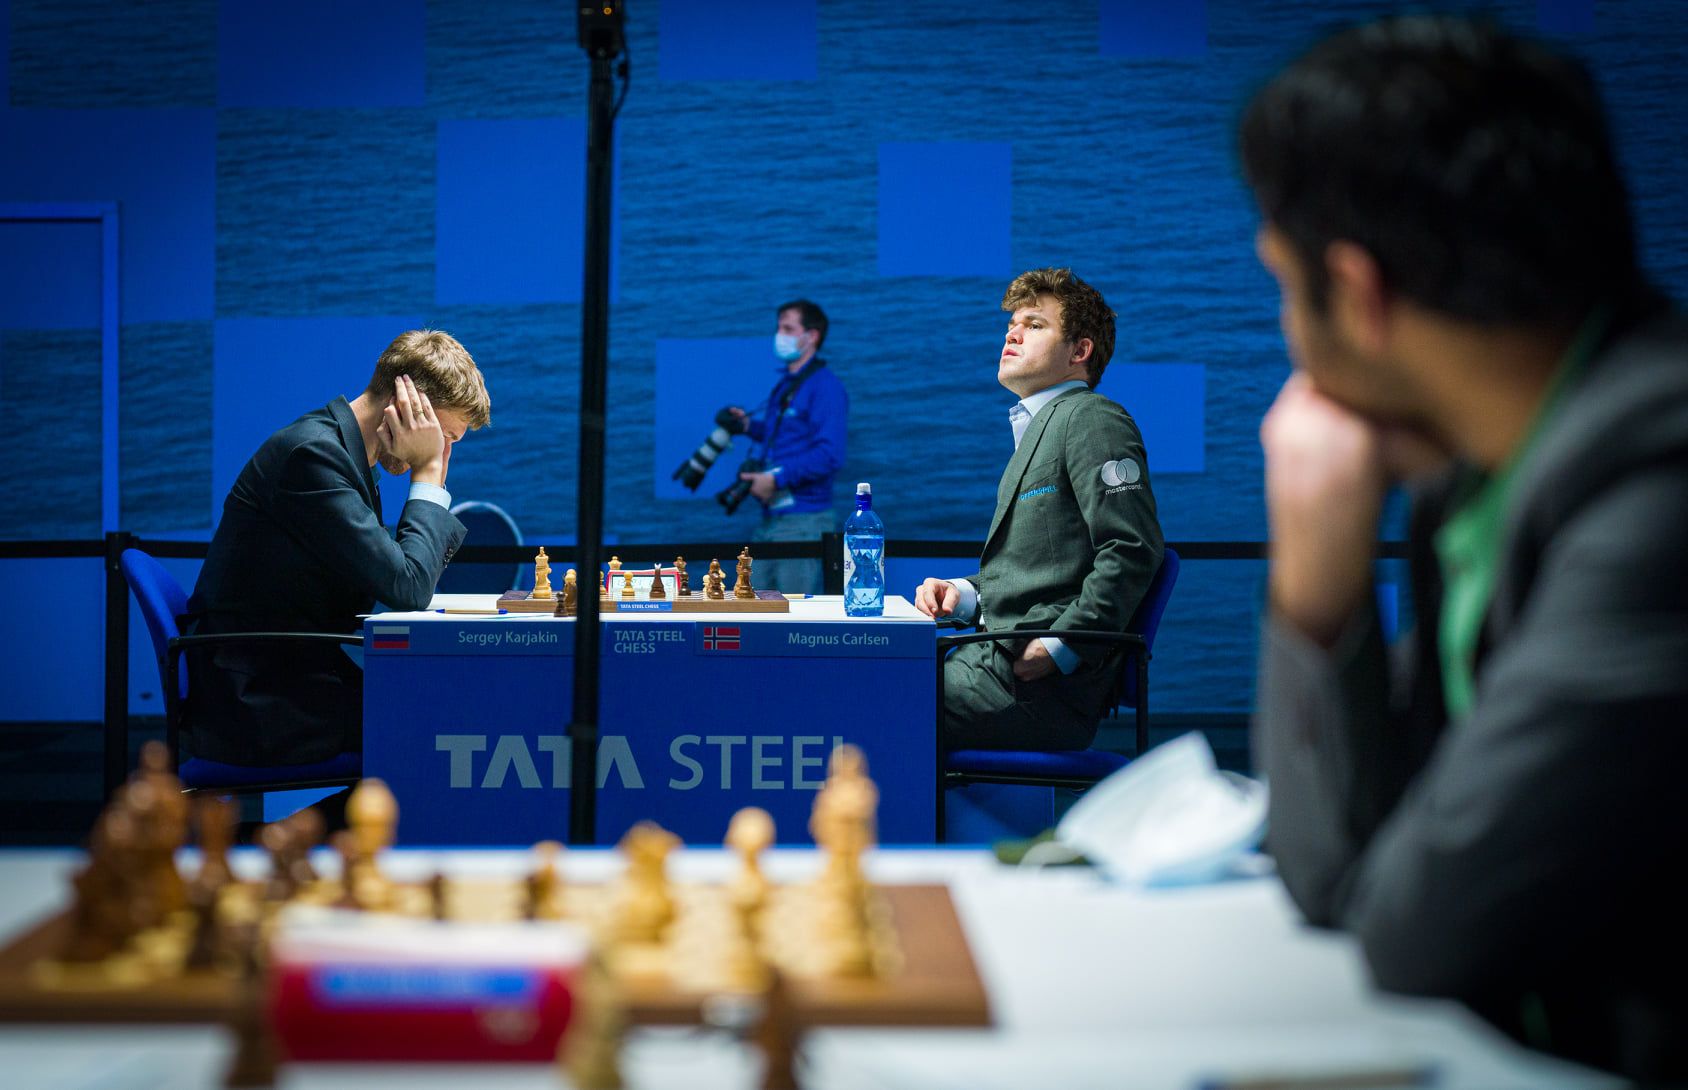 Tata Steel Chess 2022: All The Information 